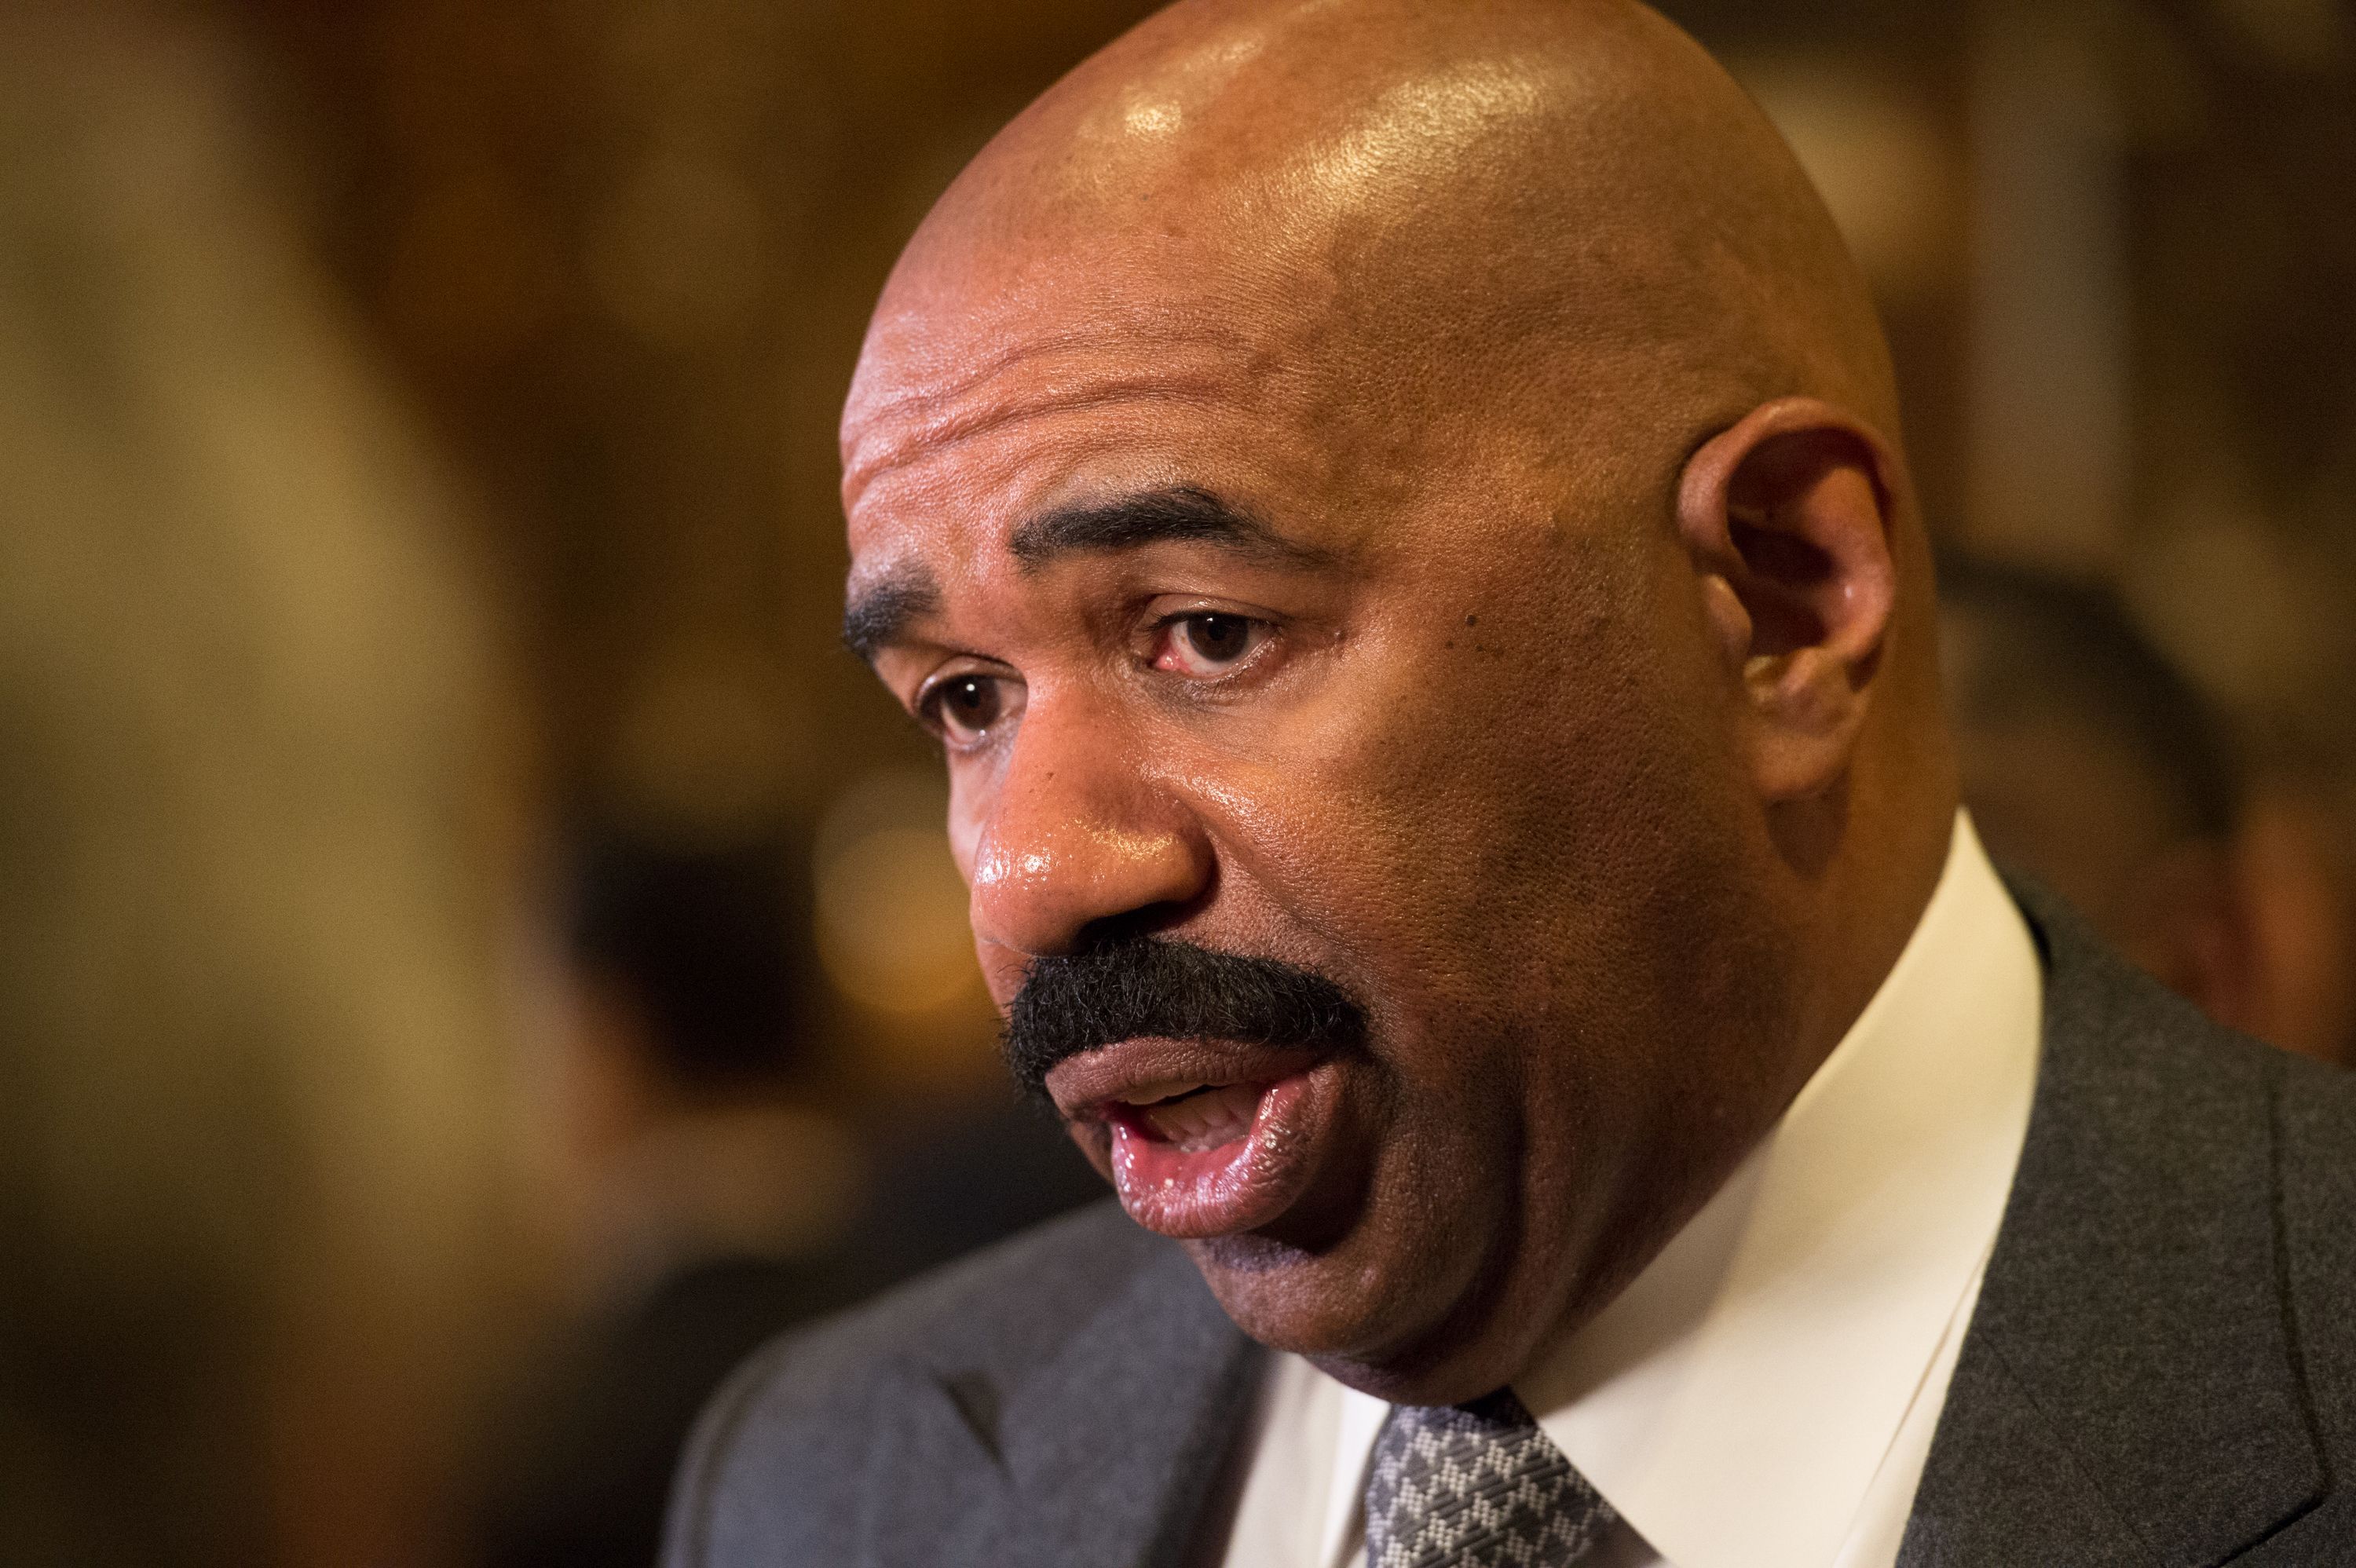 Steve Harvey speaks with the media at Trump Tower on Jan. 13, 2017 in New York. (Bryan R. Smith—AFP/Getty Images)